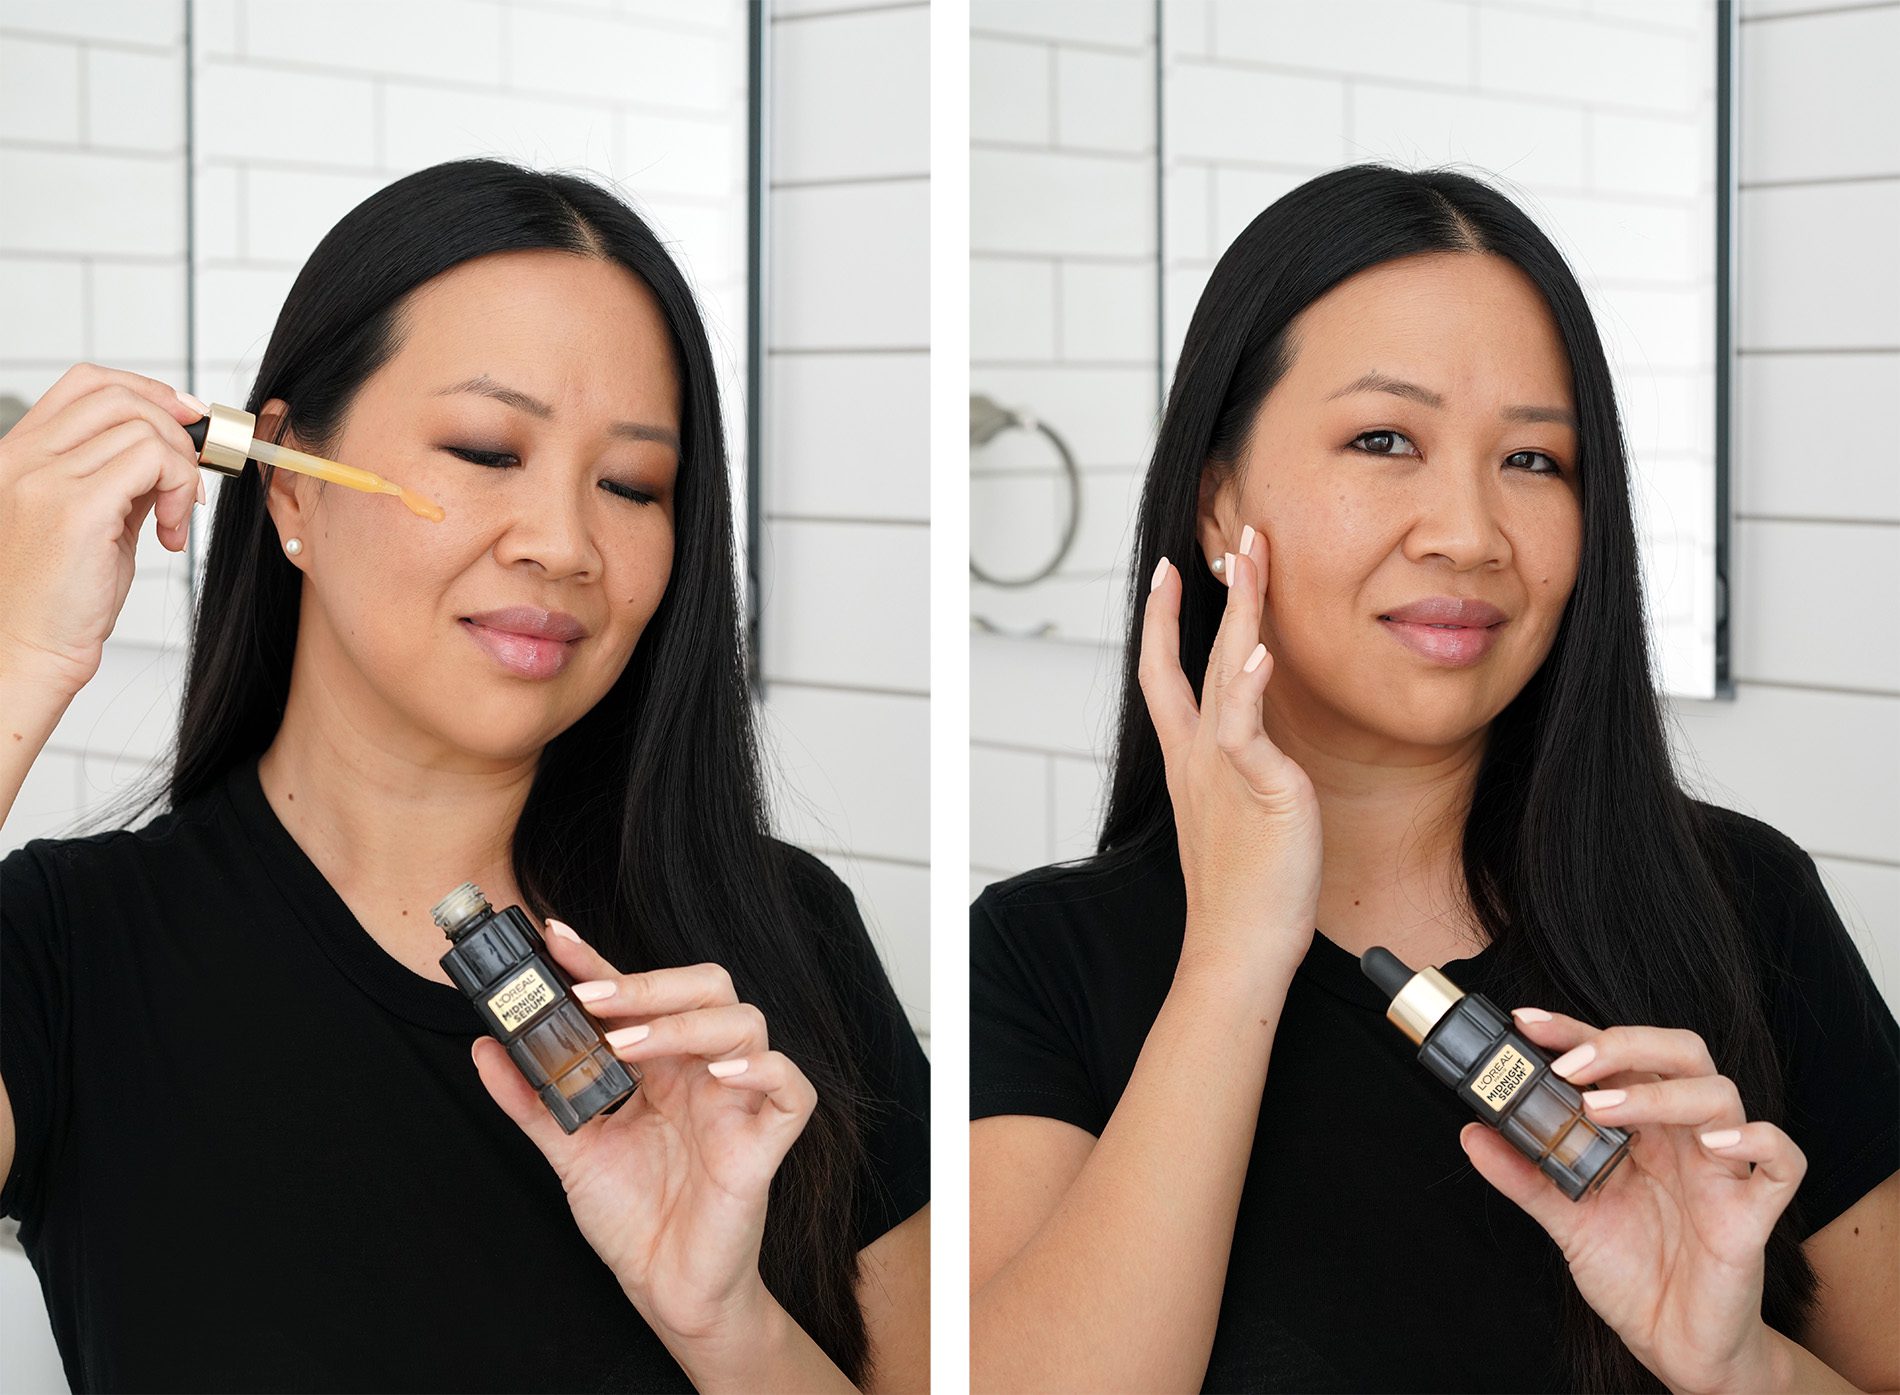 Glowing Skin with the L'Oreal Midnight Serum - The Beauty Look Book